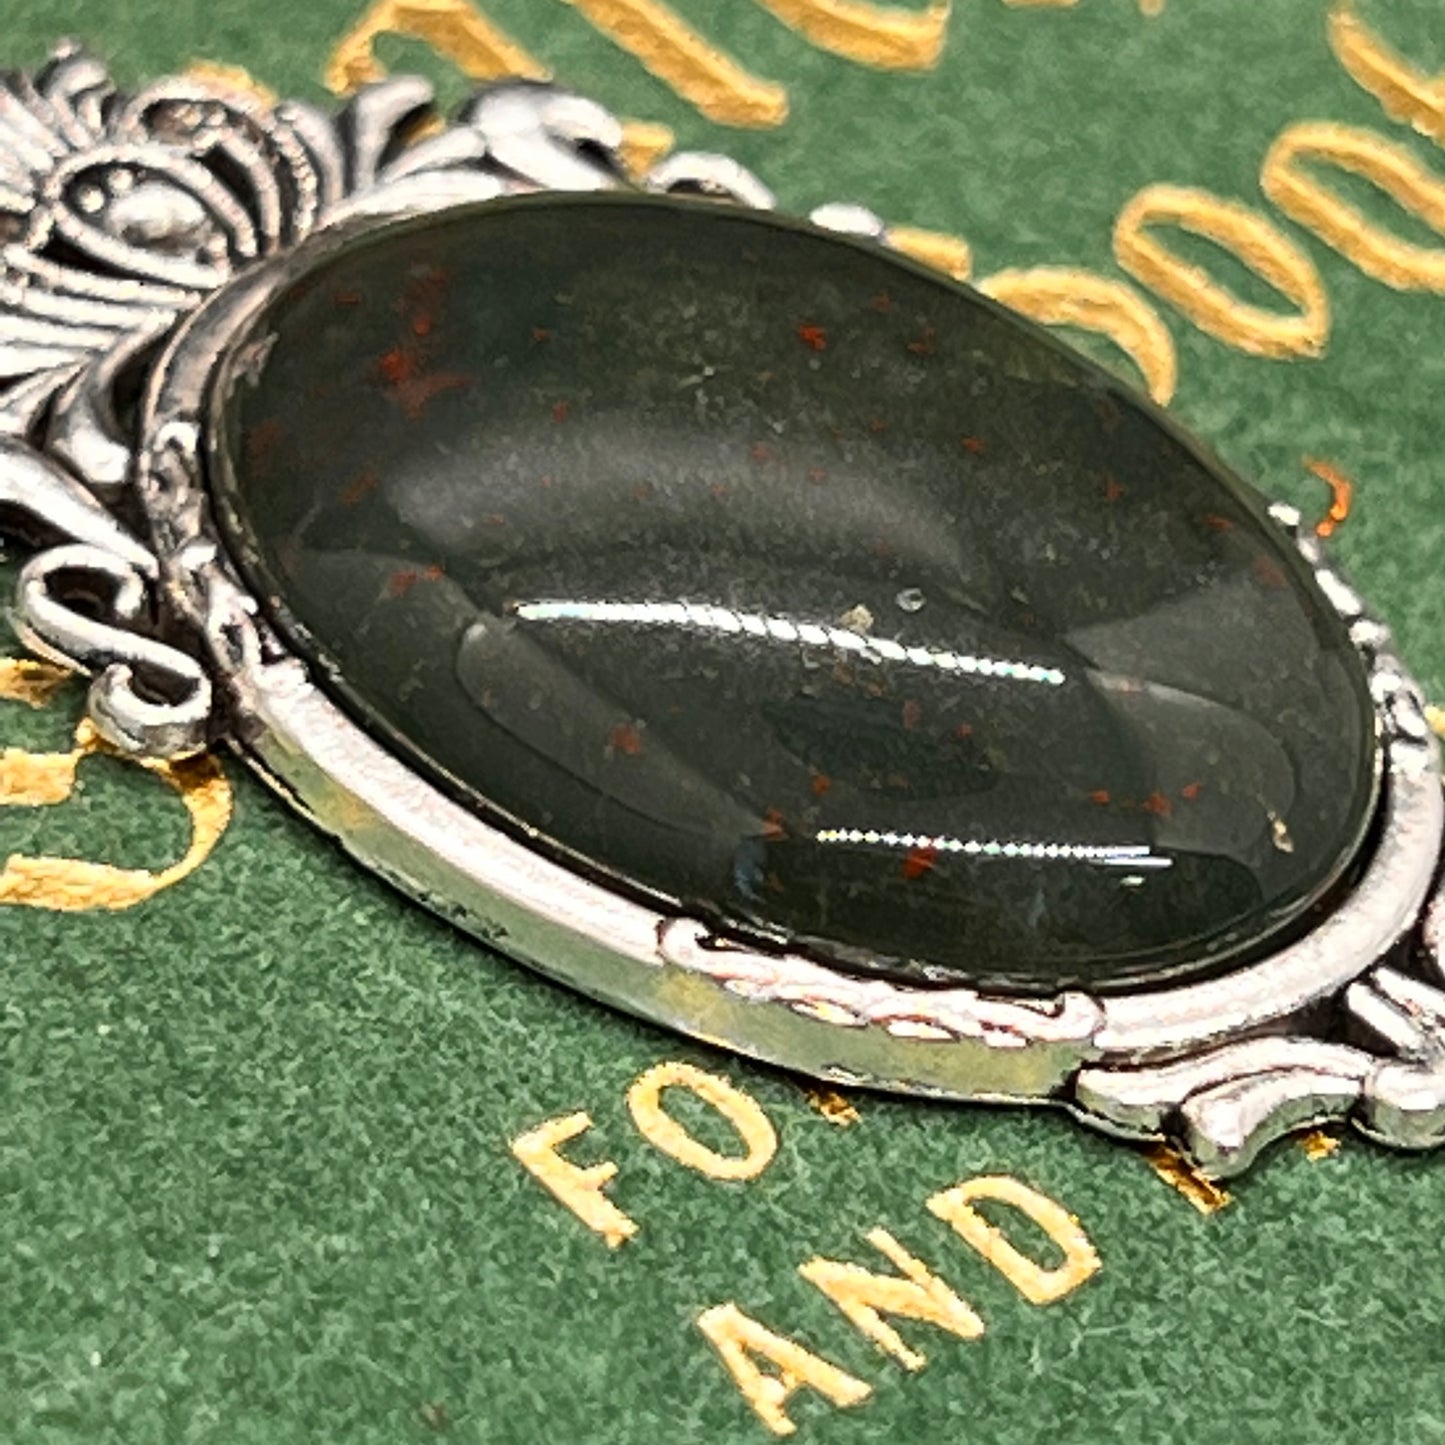 Bloodstone Cameo Necklace